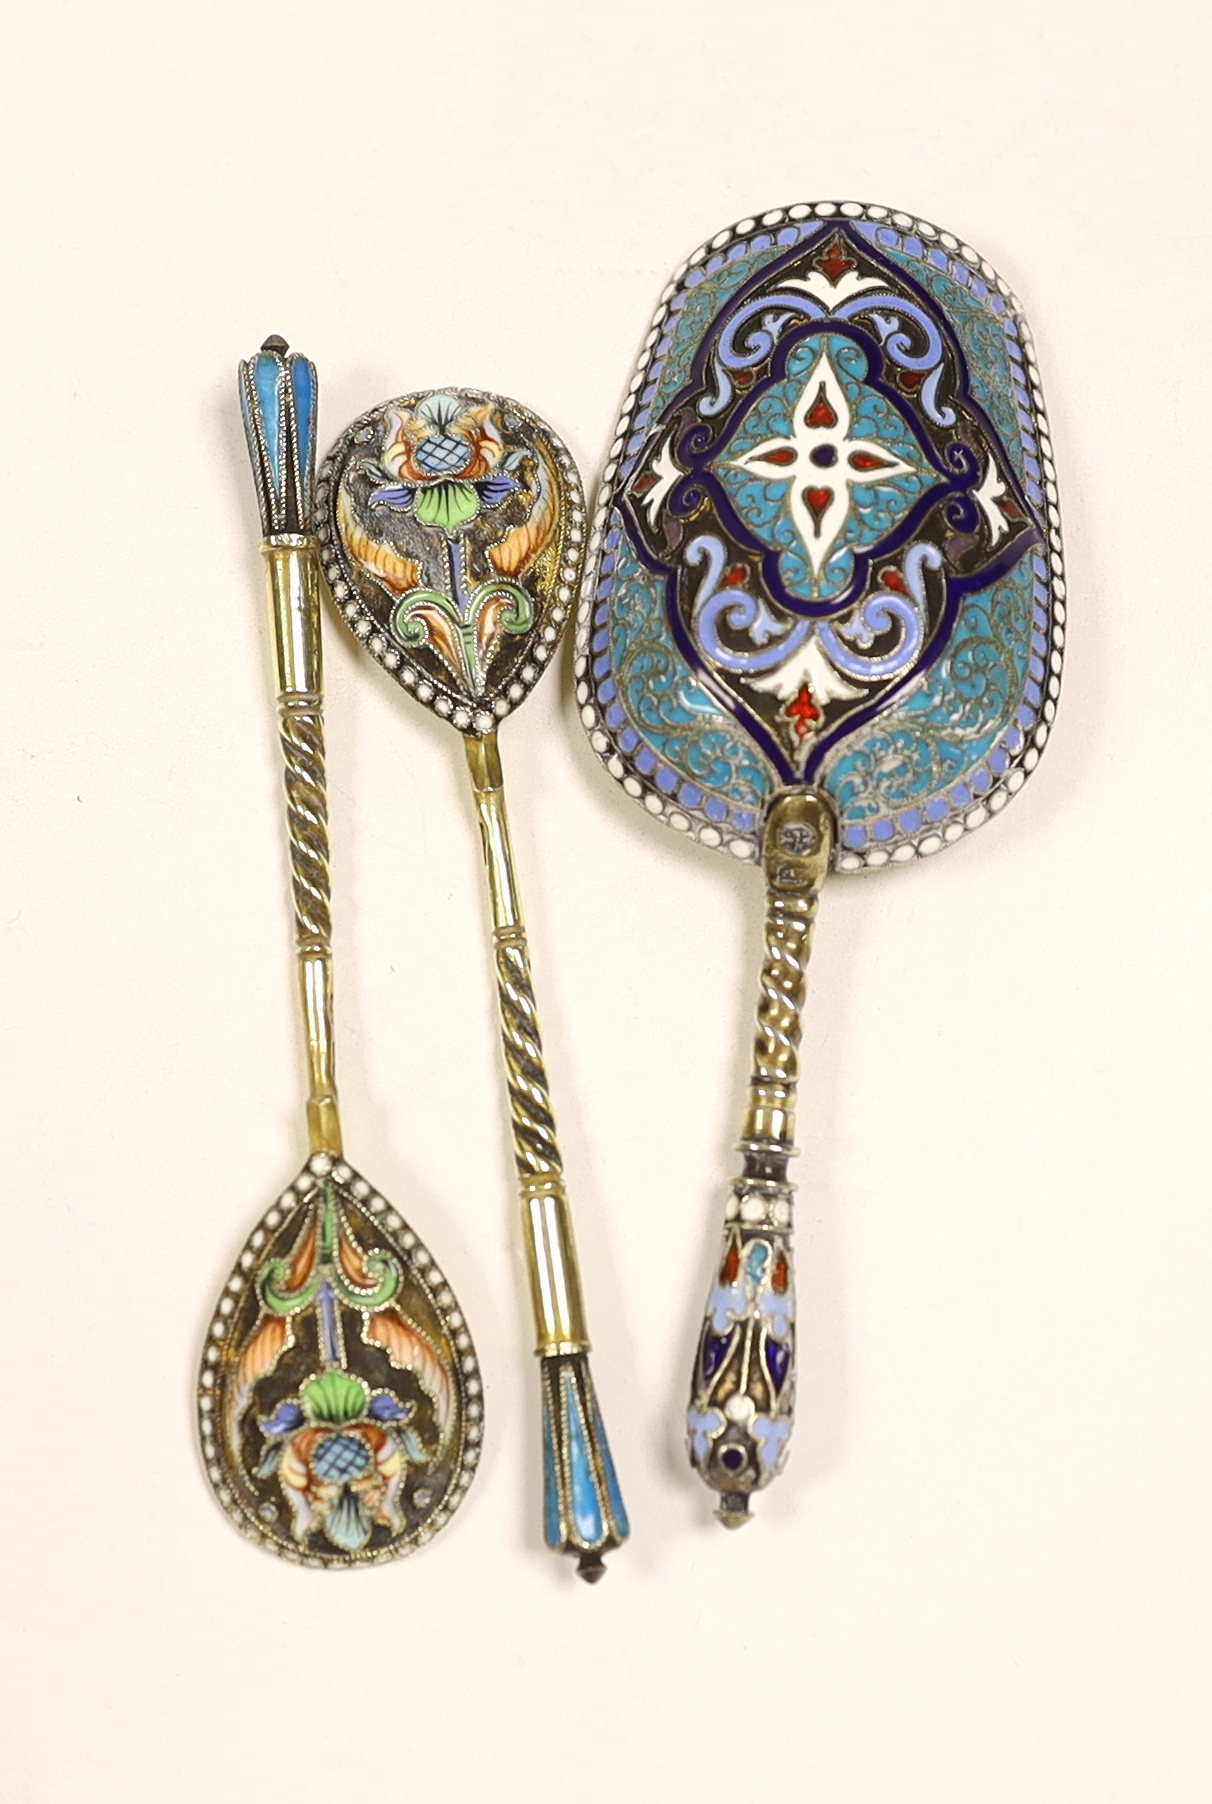 A late 19th century Russian 84 zolotnik and polychrome cloisonné enamel shovel shaped spoon, assay master Anatoly Artsibashov?, Moscow, 1891, 10.6cm, two later Russian similar coffee spoons and a cased 1911 commemorative